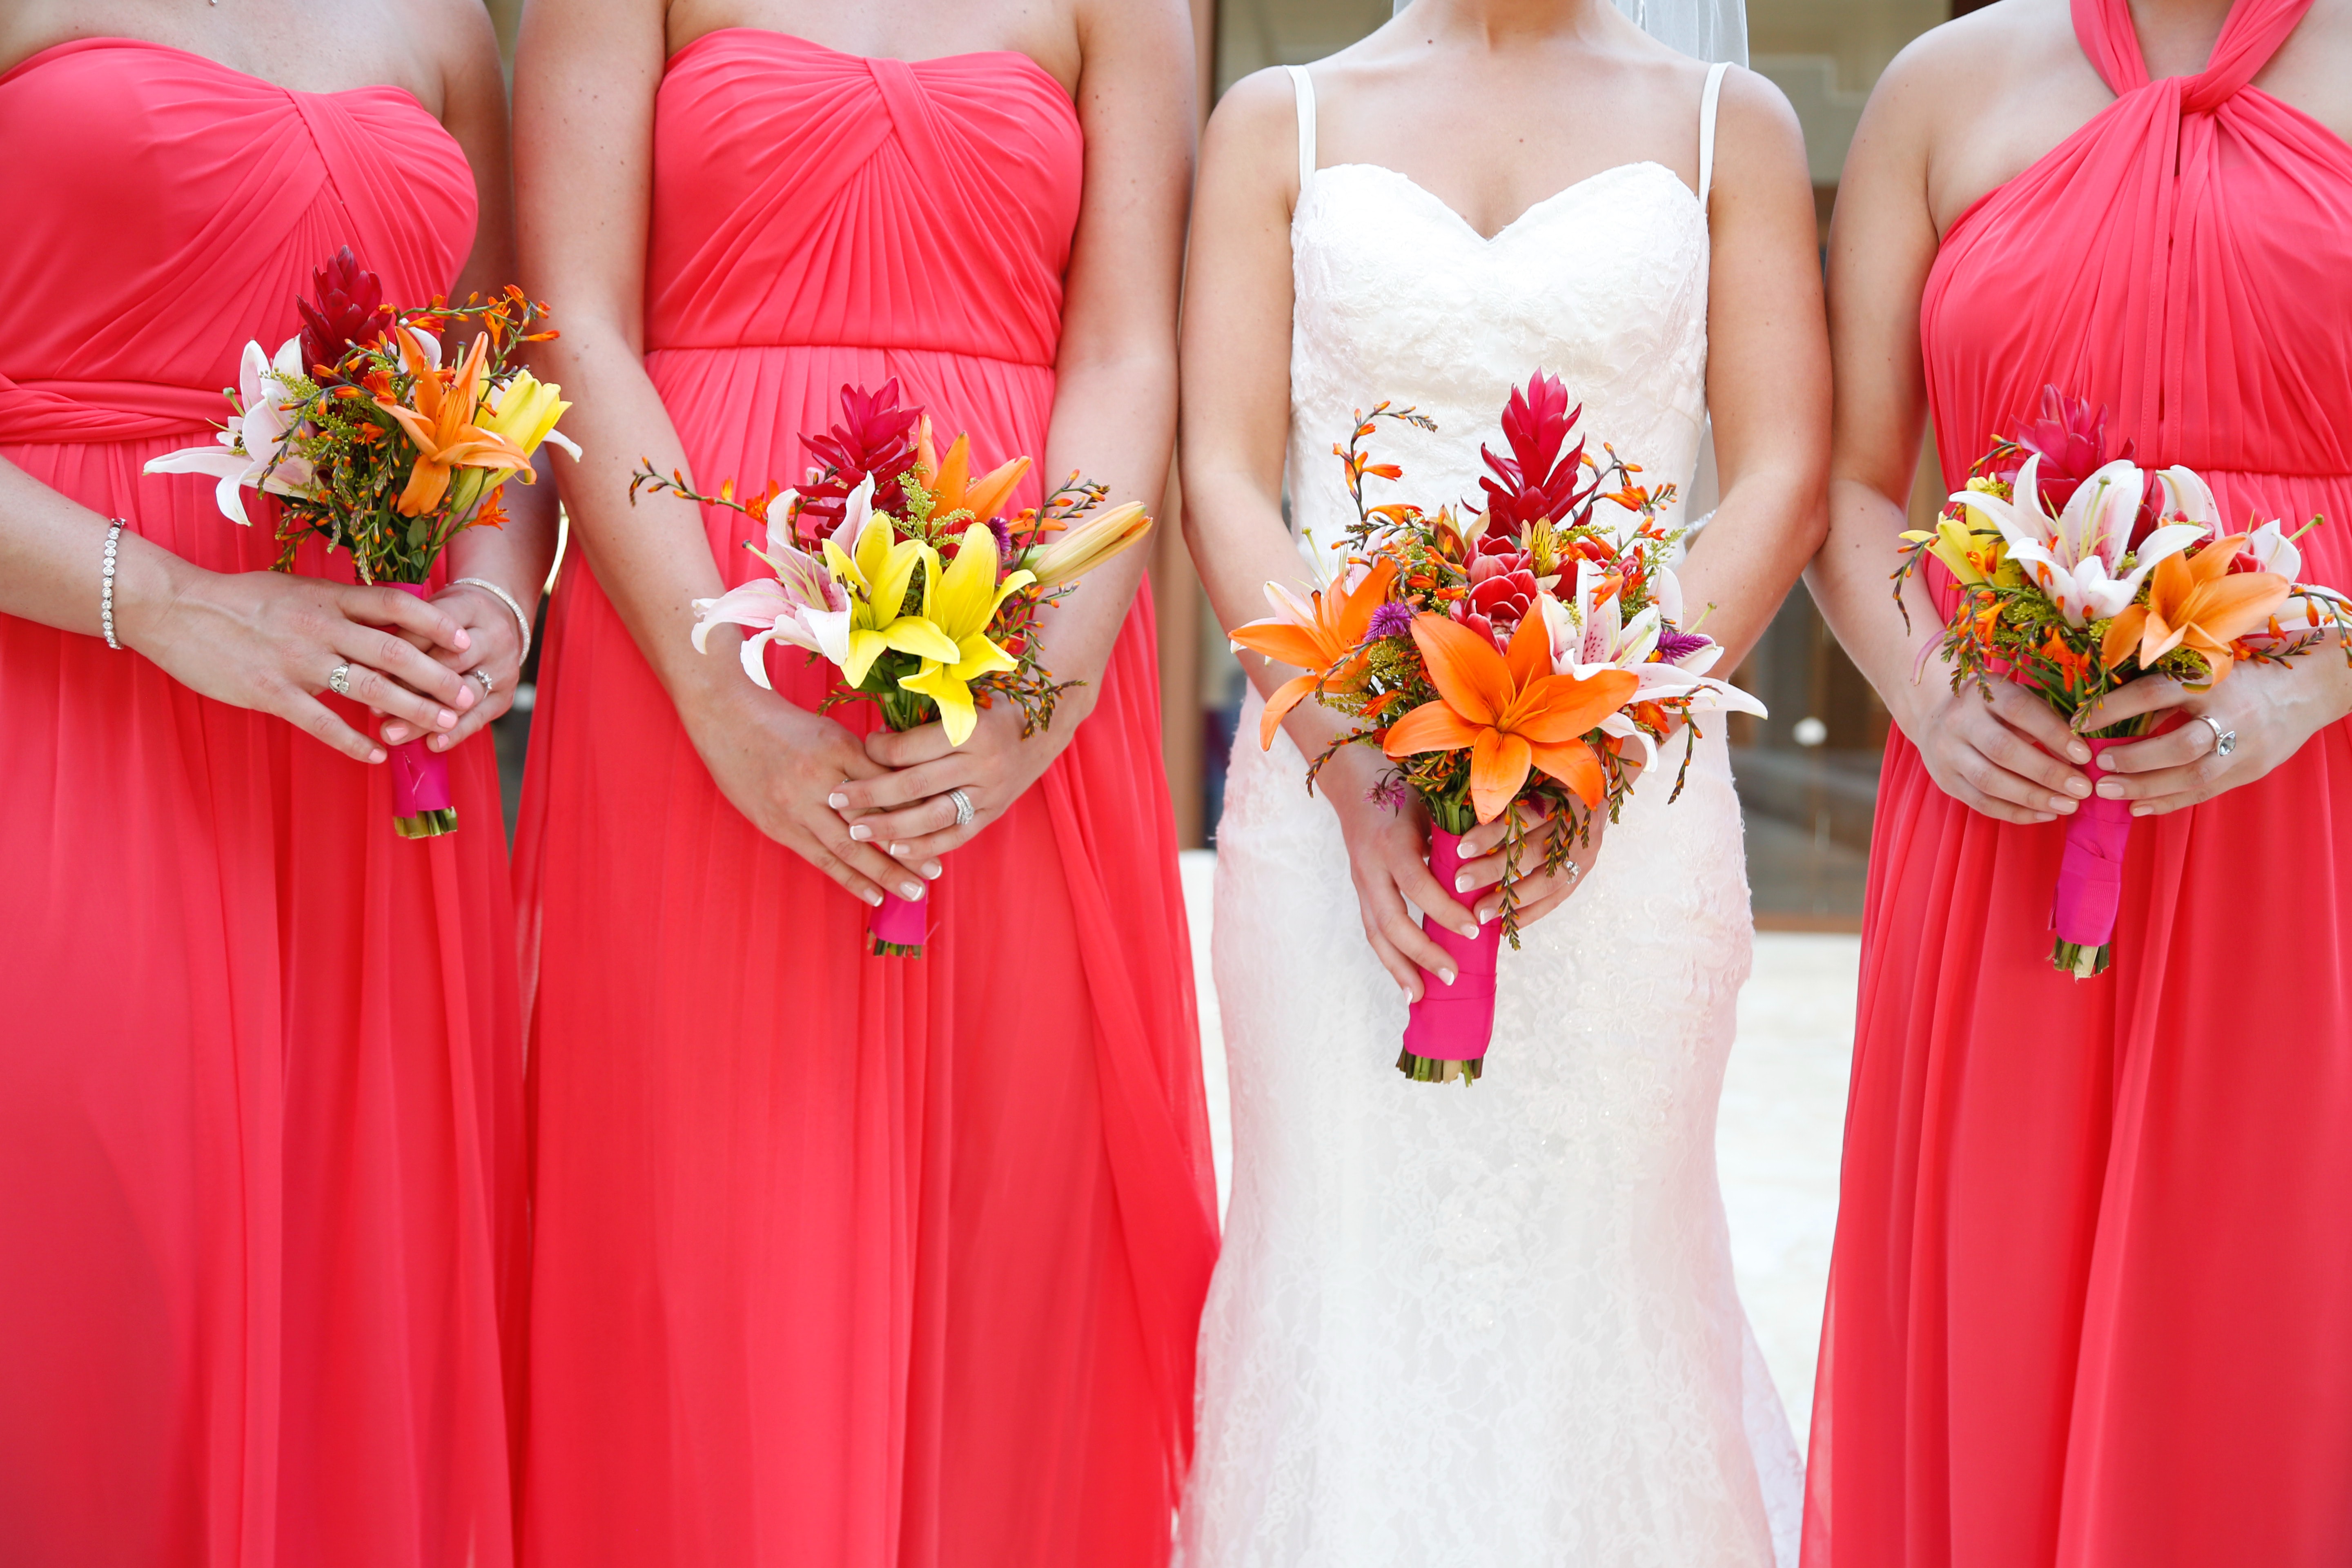 Step by step instructions to Discover Larger Size Bridesmaids Dresses